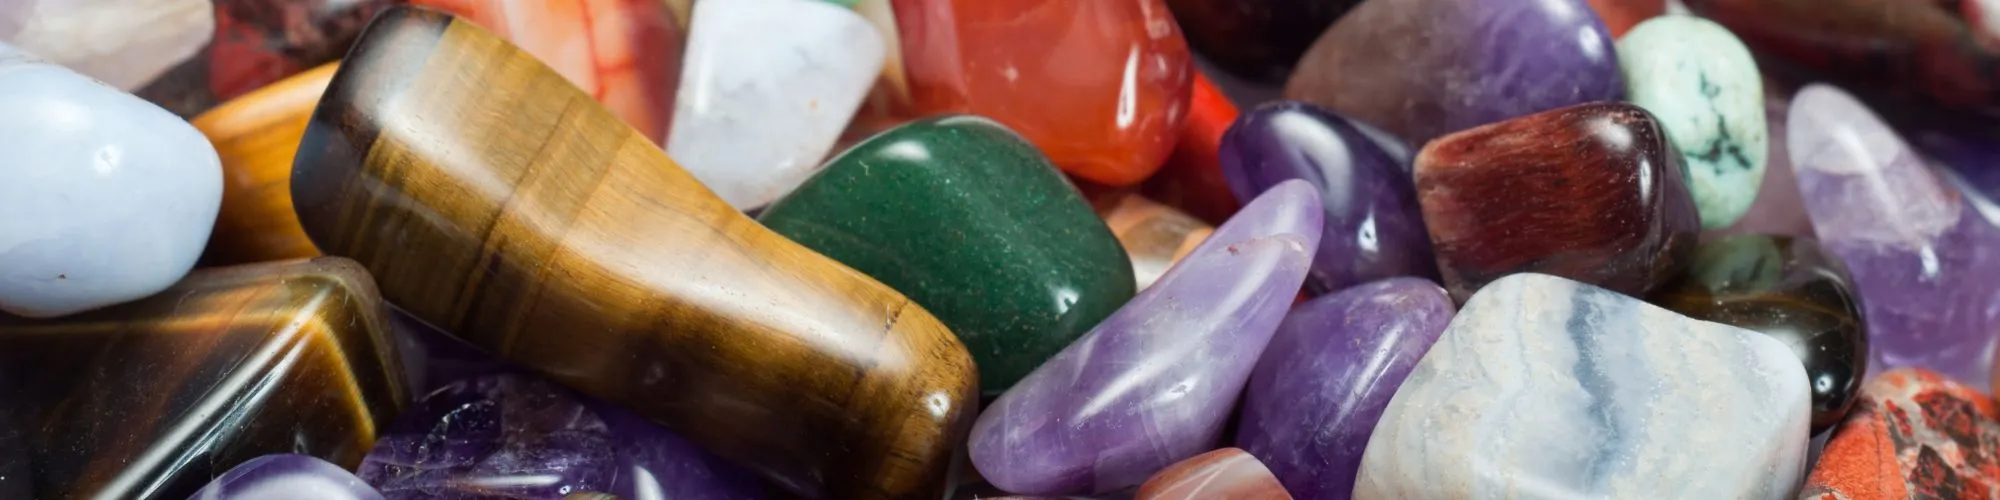 Which gemstones are safe as yoni egg?